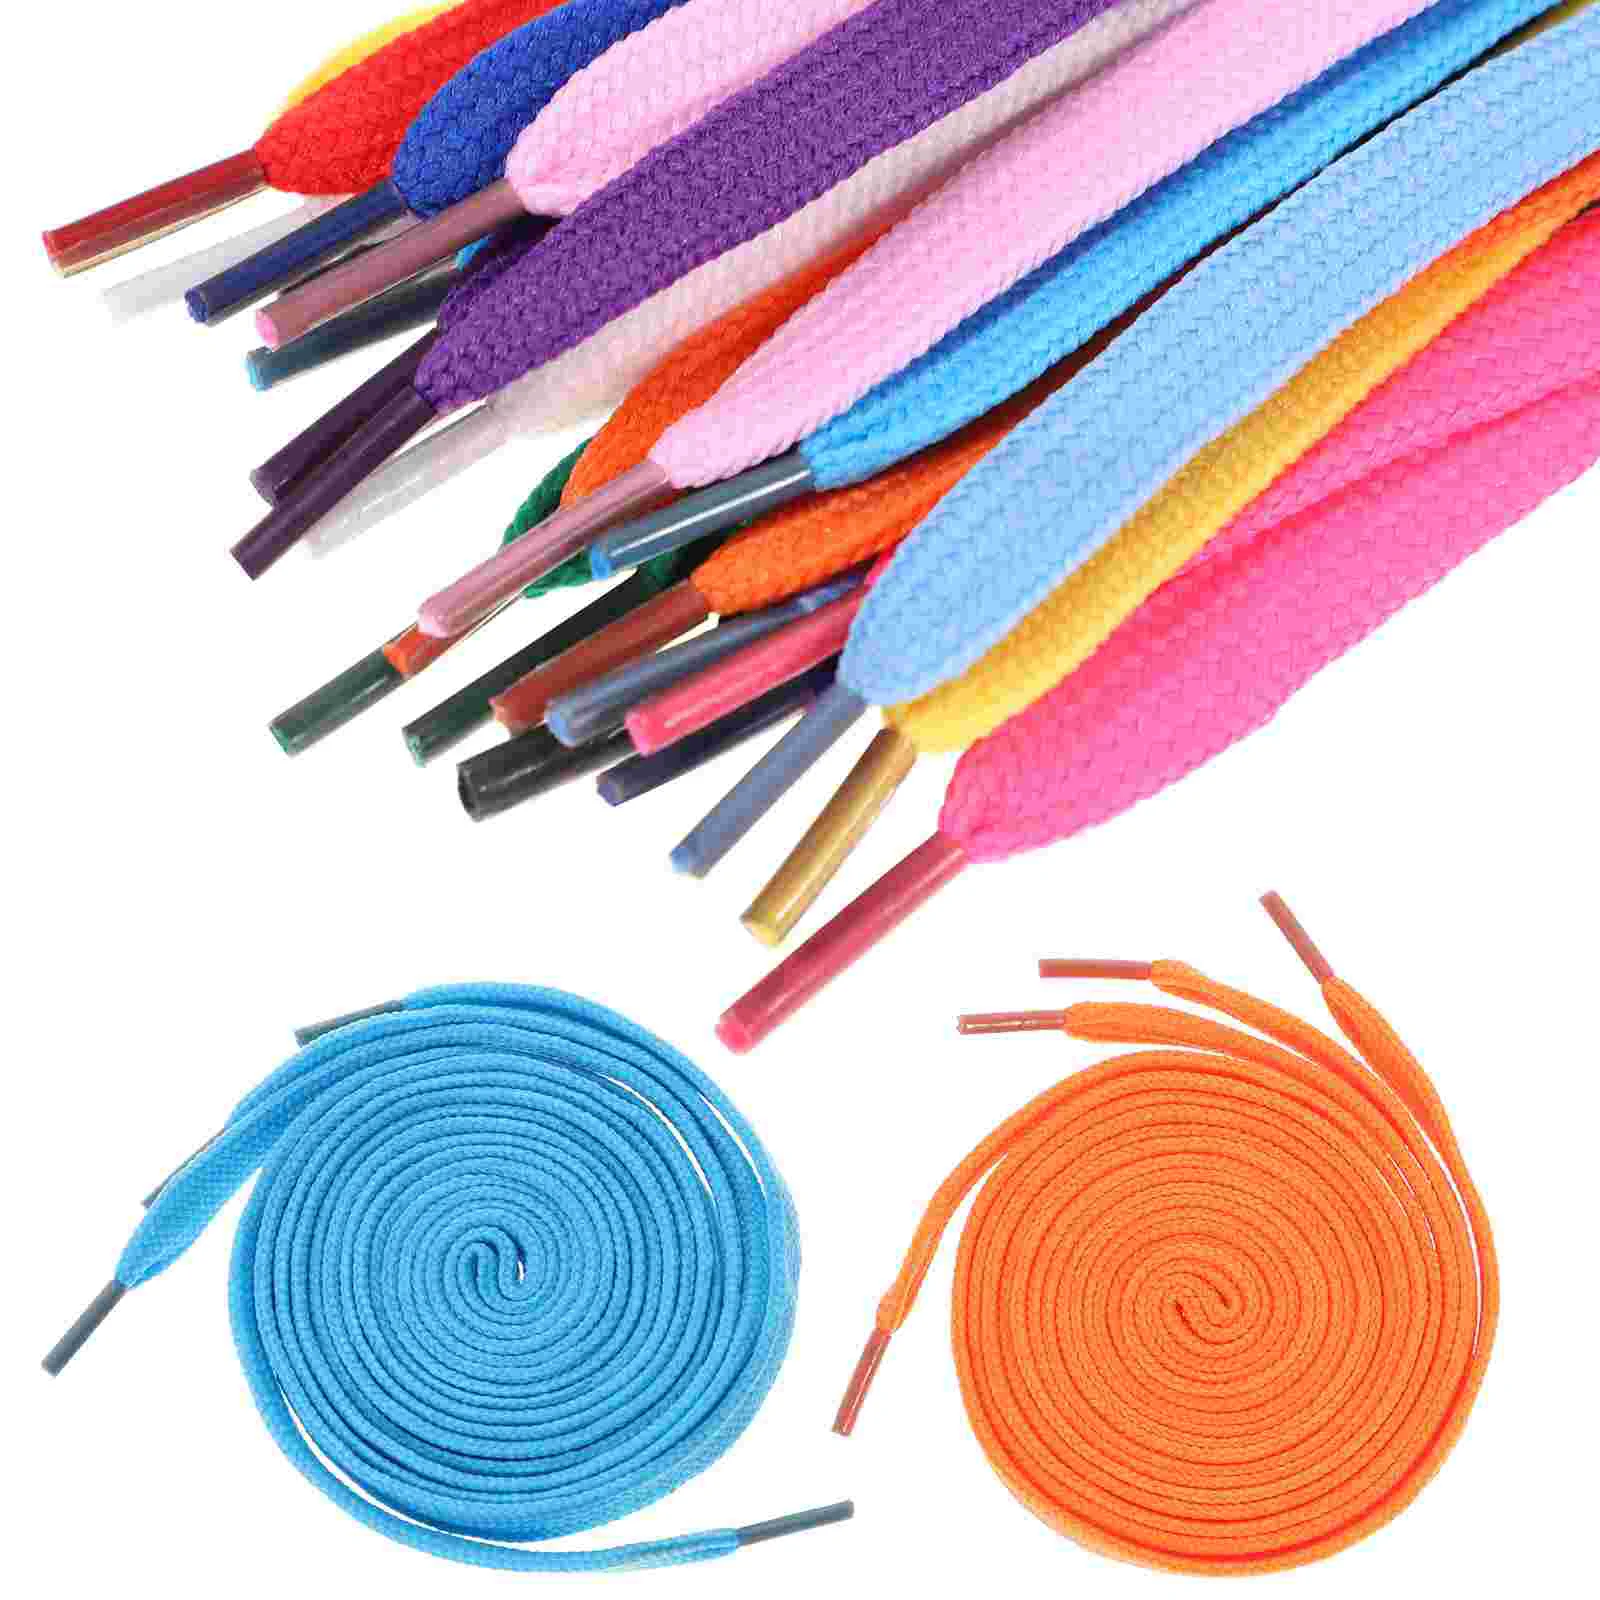 of Replacement Flat Shoelaces Shoe Laces Strings for Sports Shoes /Boots /Sneakers /Skates (Assorted Colors) 1pair flat shoelaces two color polyester sneakers boots shoe lace checkered double layer hollow flat shoelaces for shoes strings